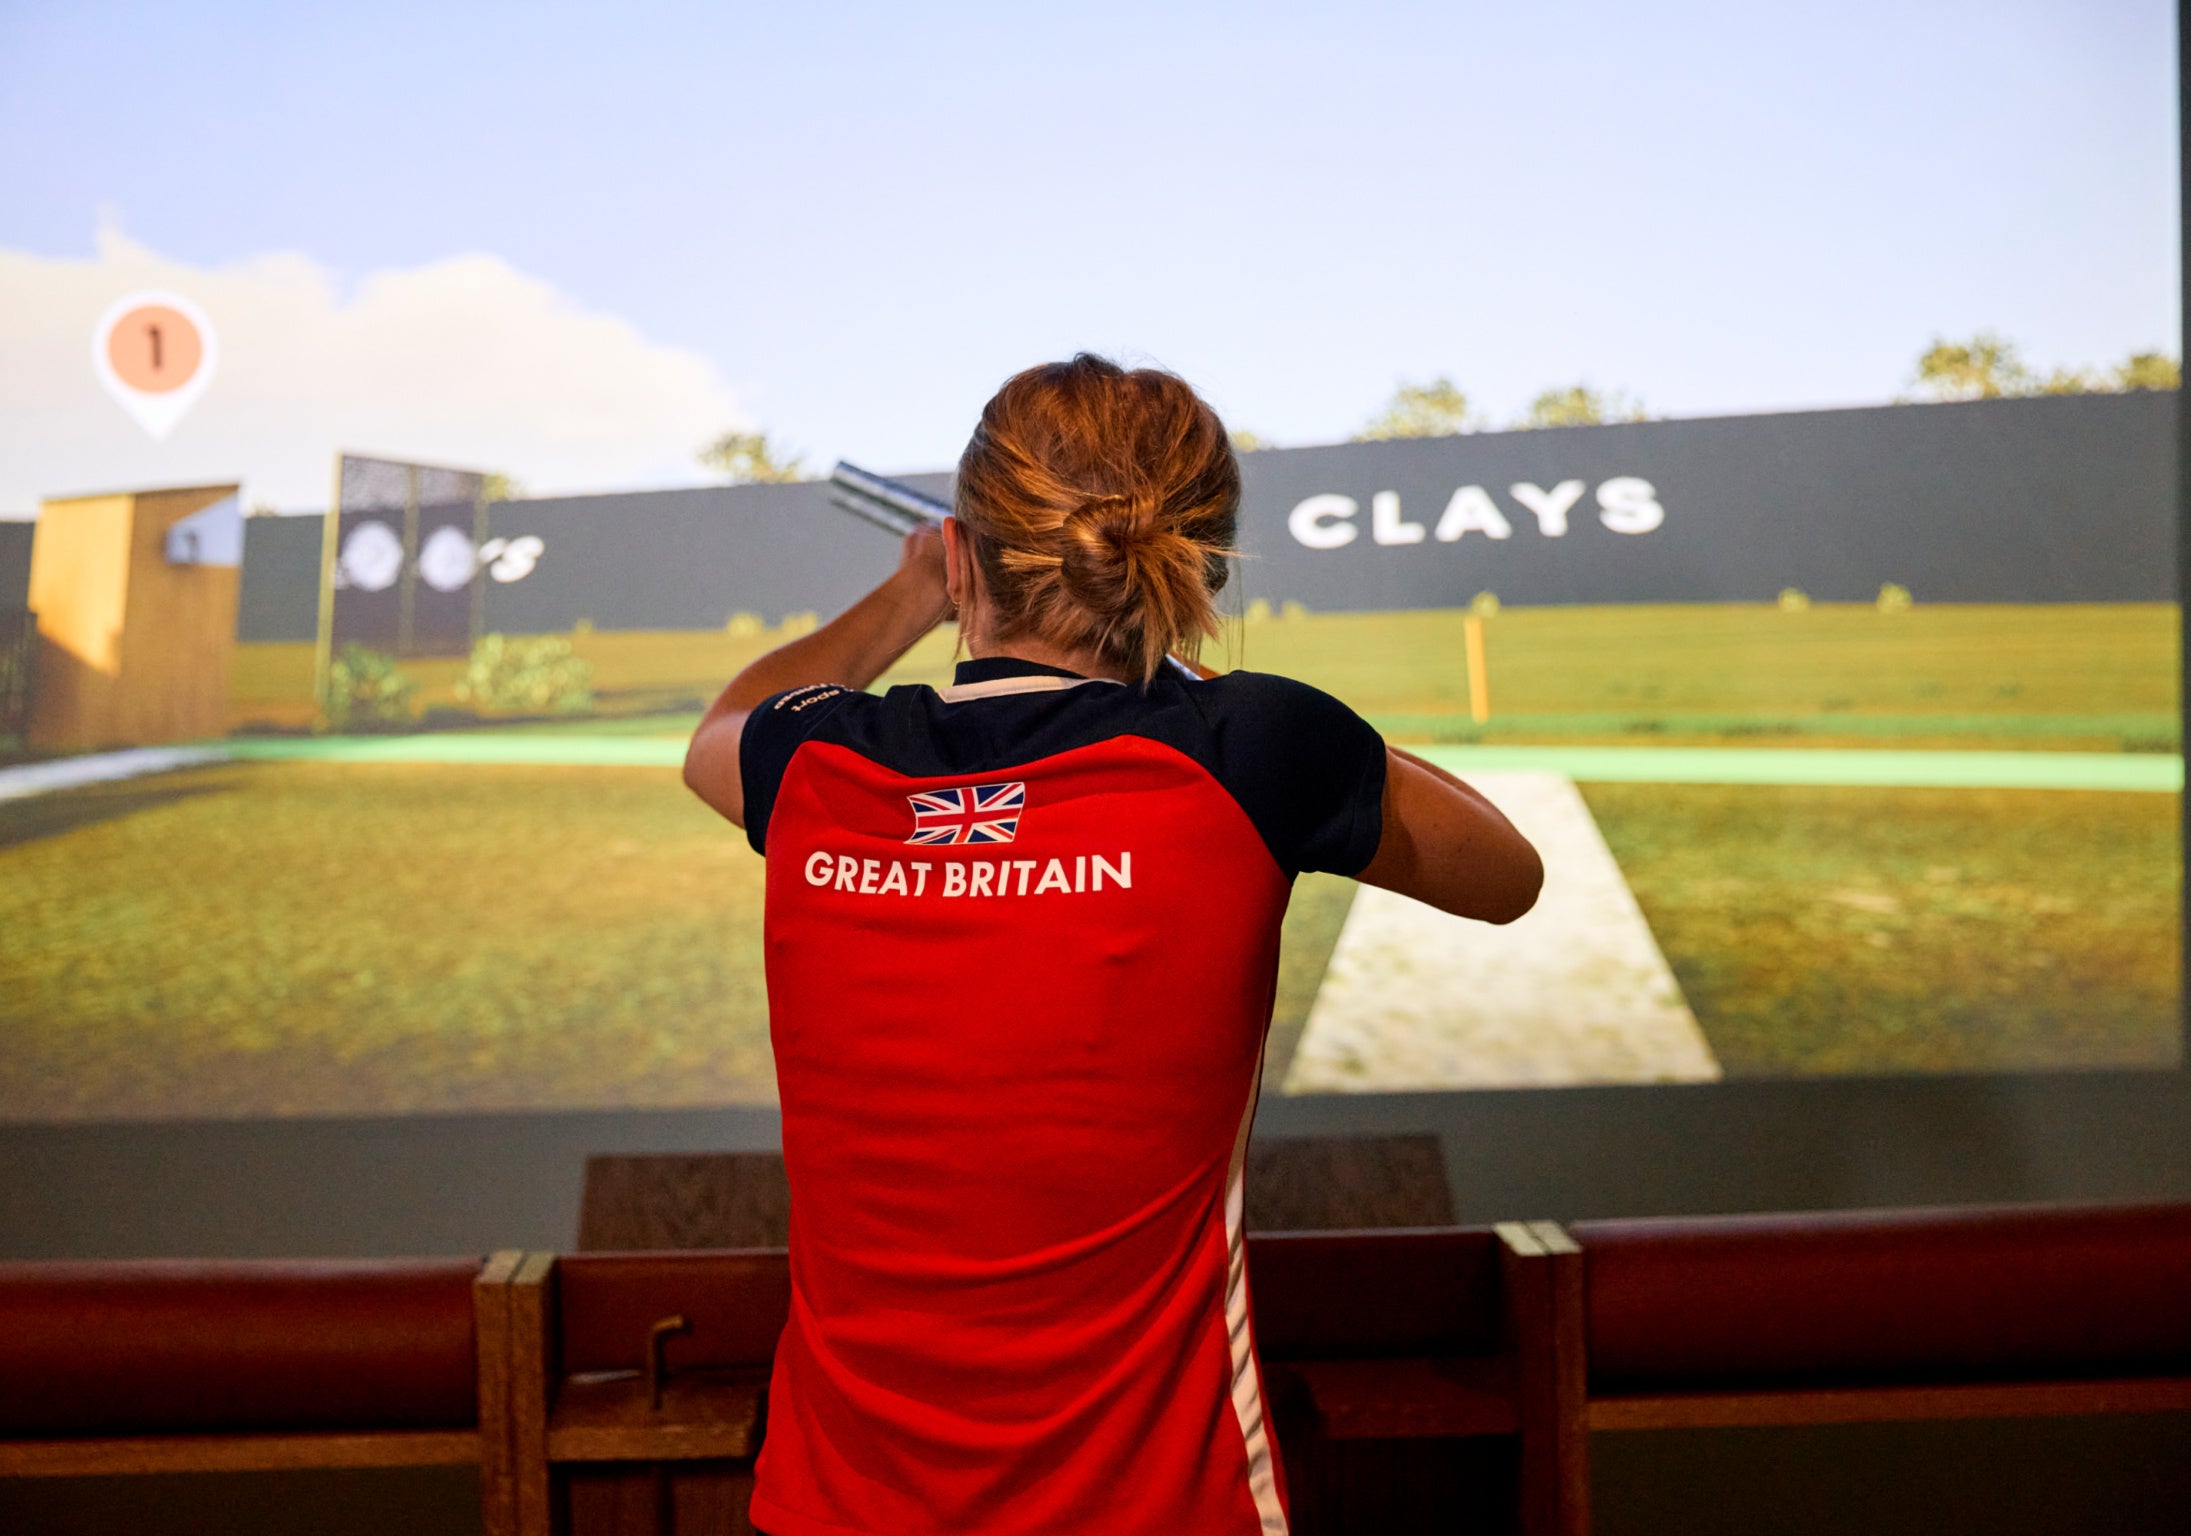 Score well at Clays and you could win tickets to the Olympic Games in Paris